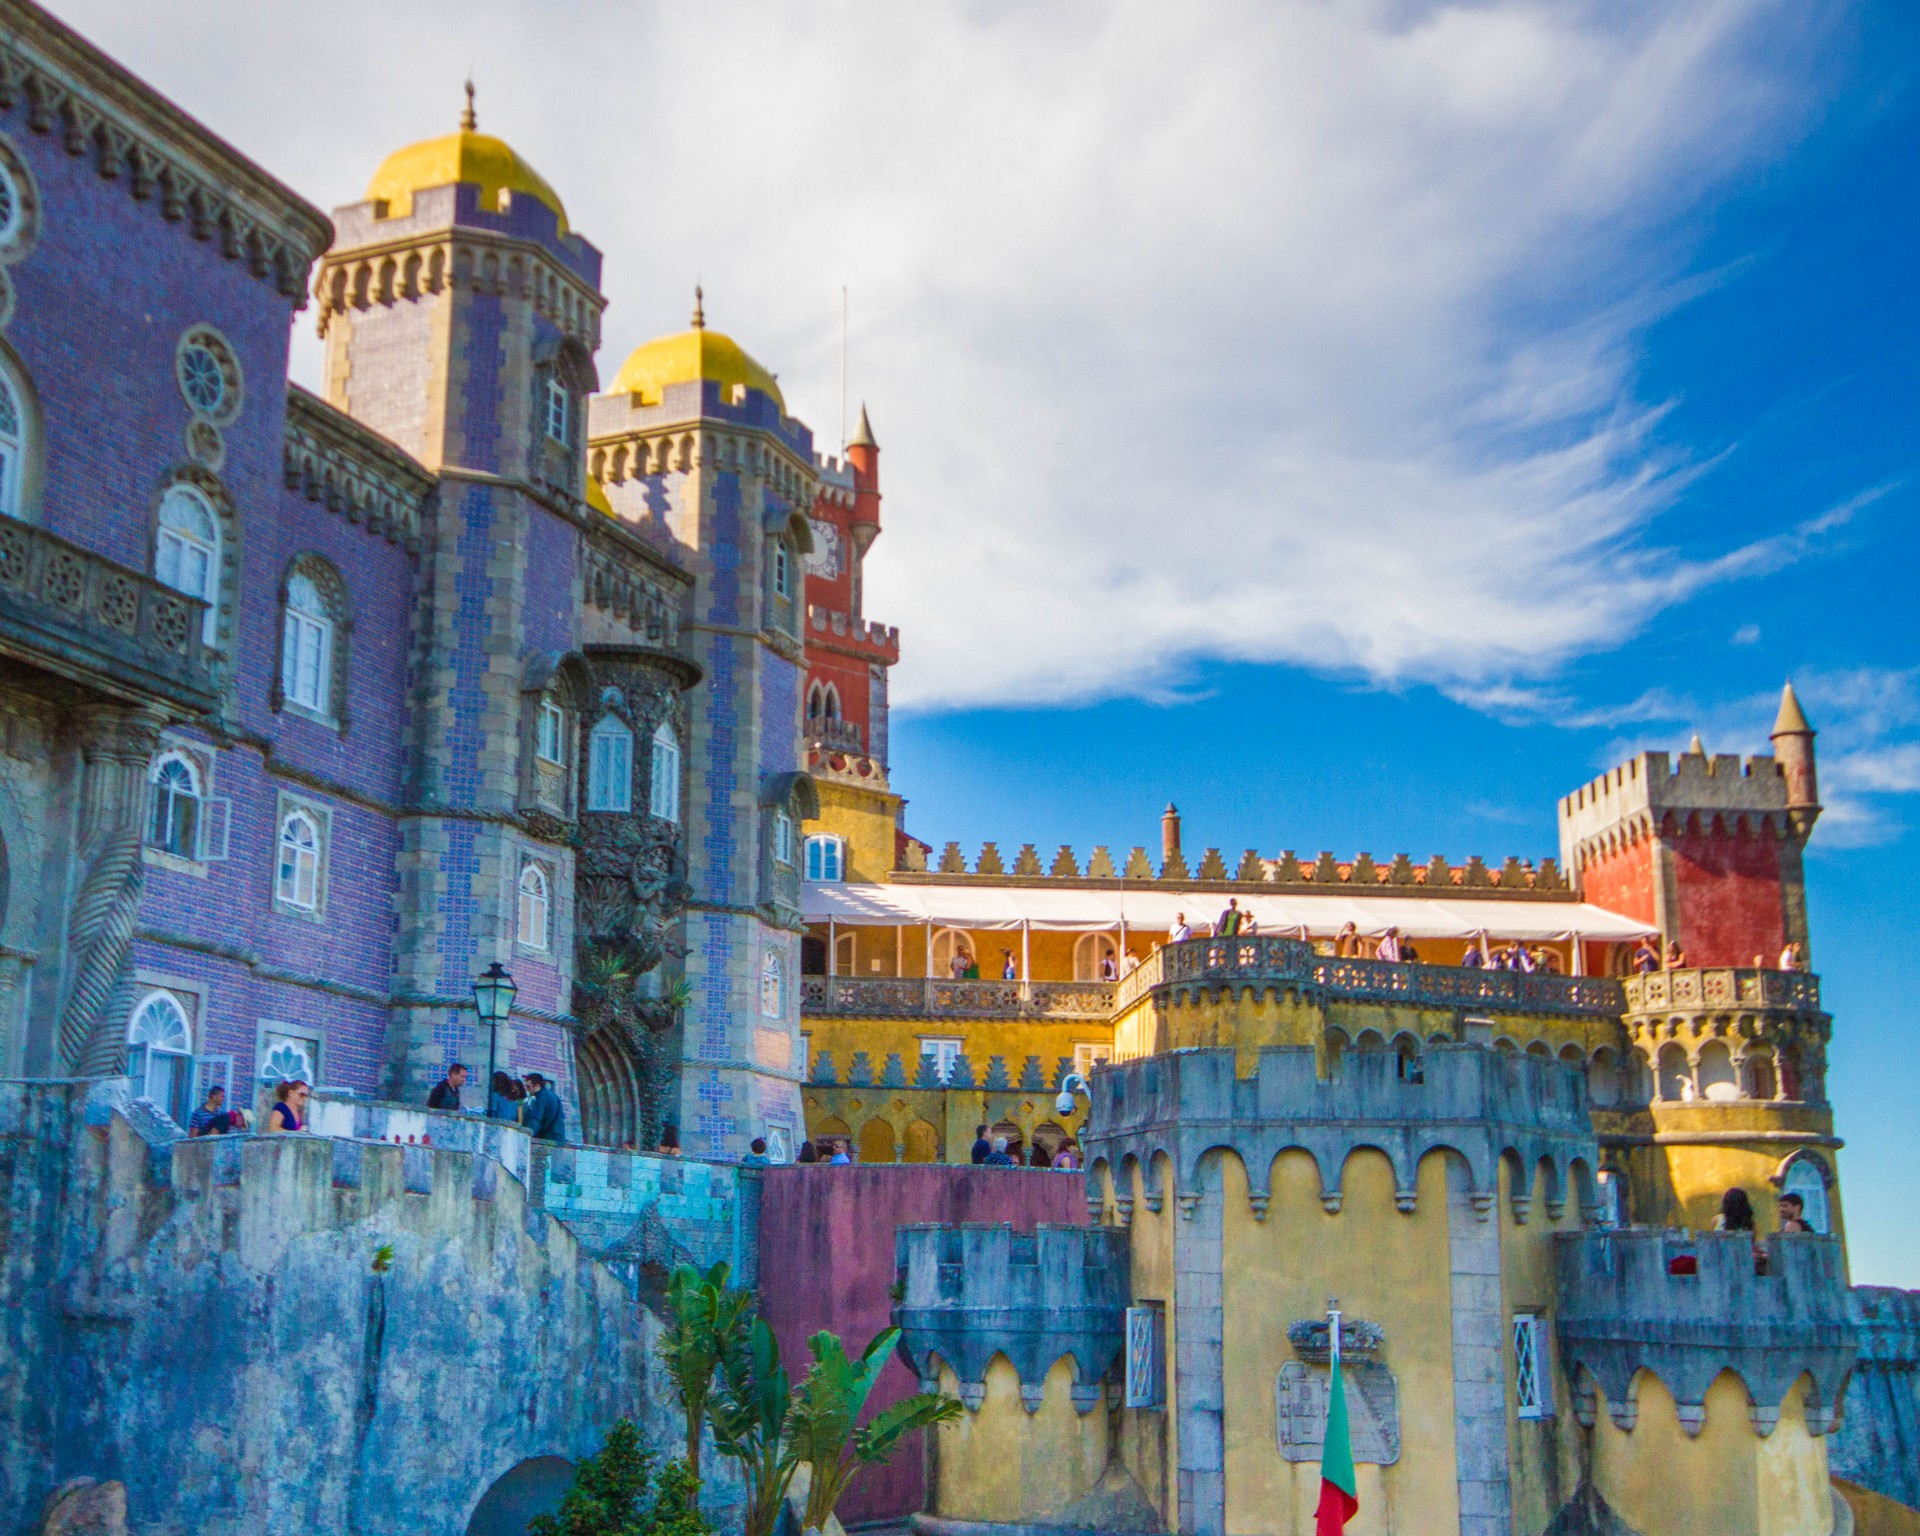 A castle with multi-coloured facade stands against a blue mountain sky - Sintra, Portugal